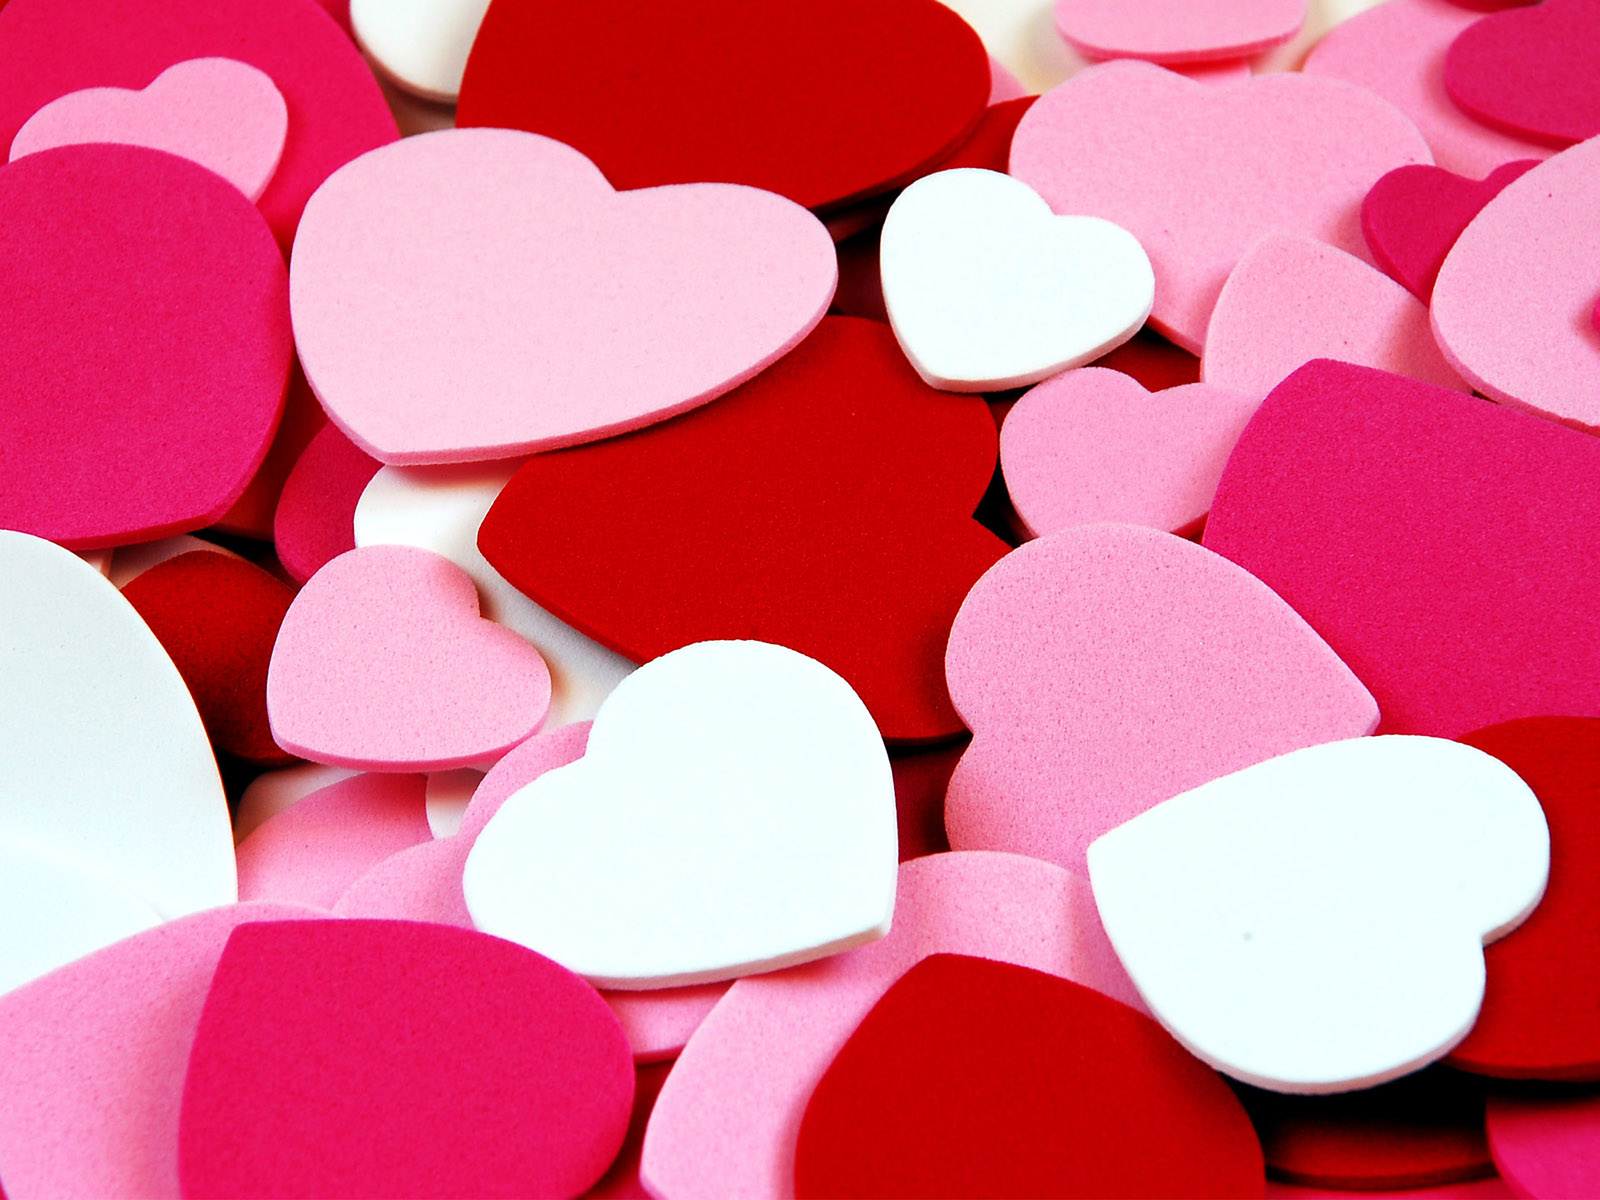 Valentine's Day Hearts wallpaper - Love Wallpapers